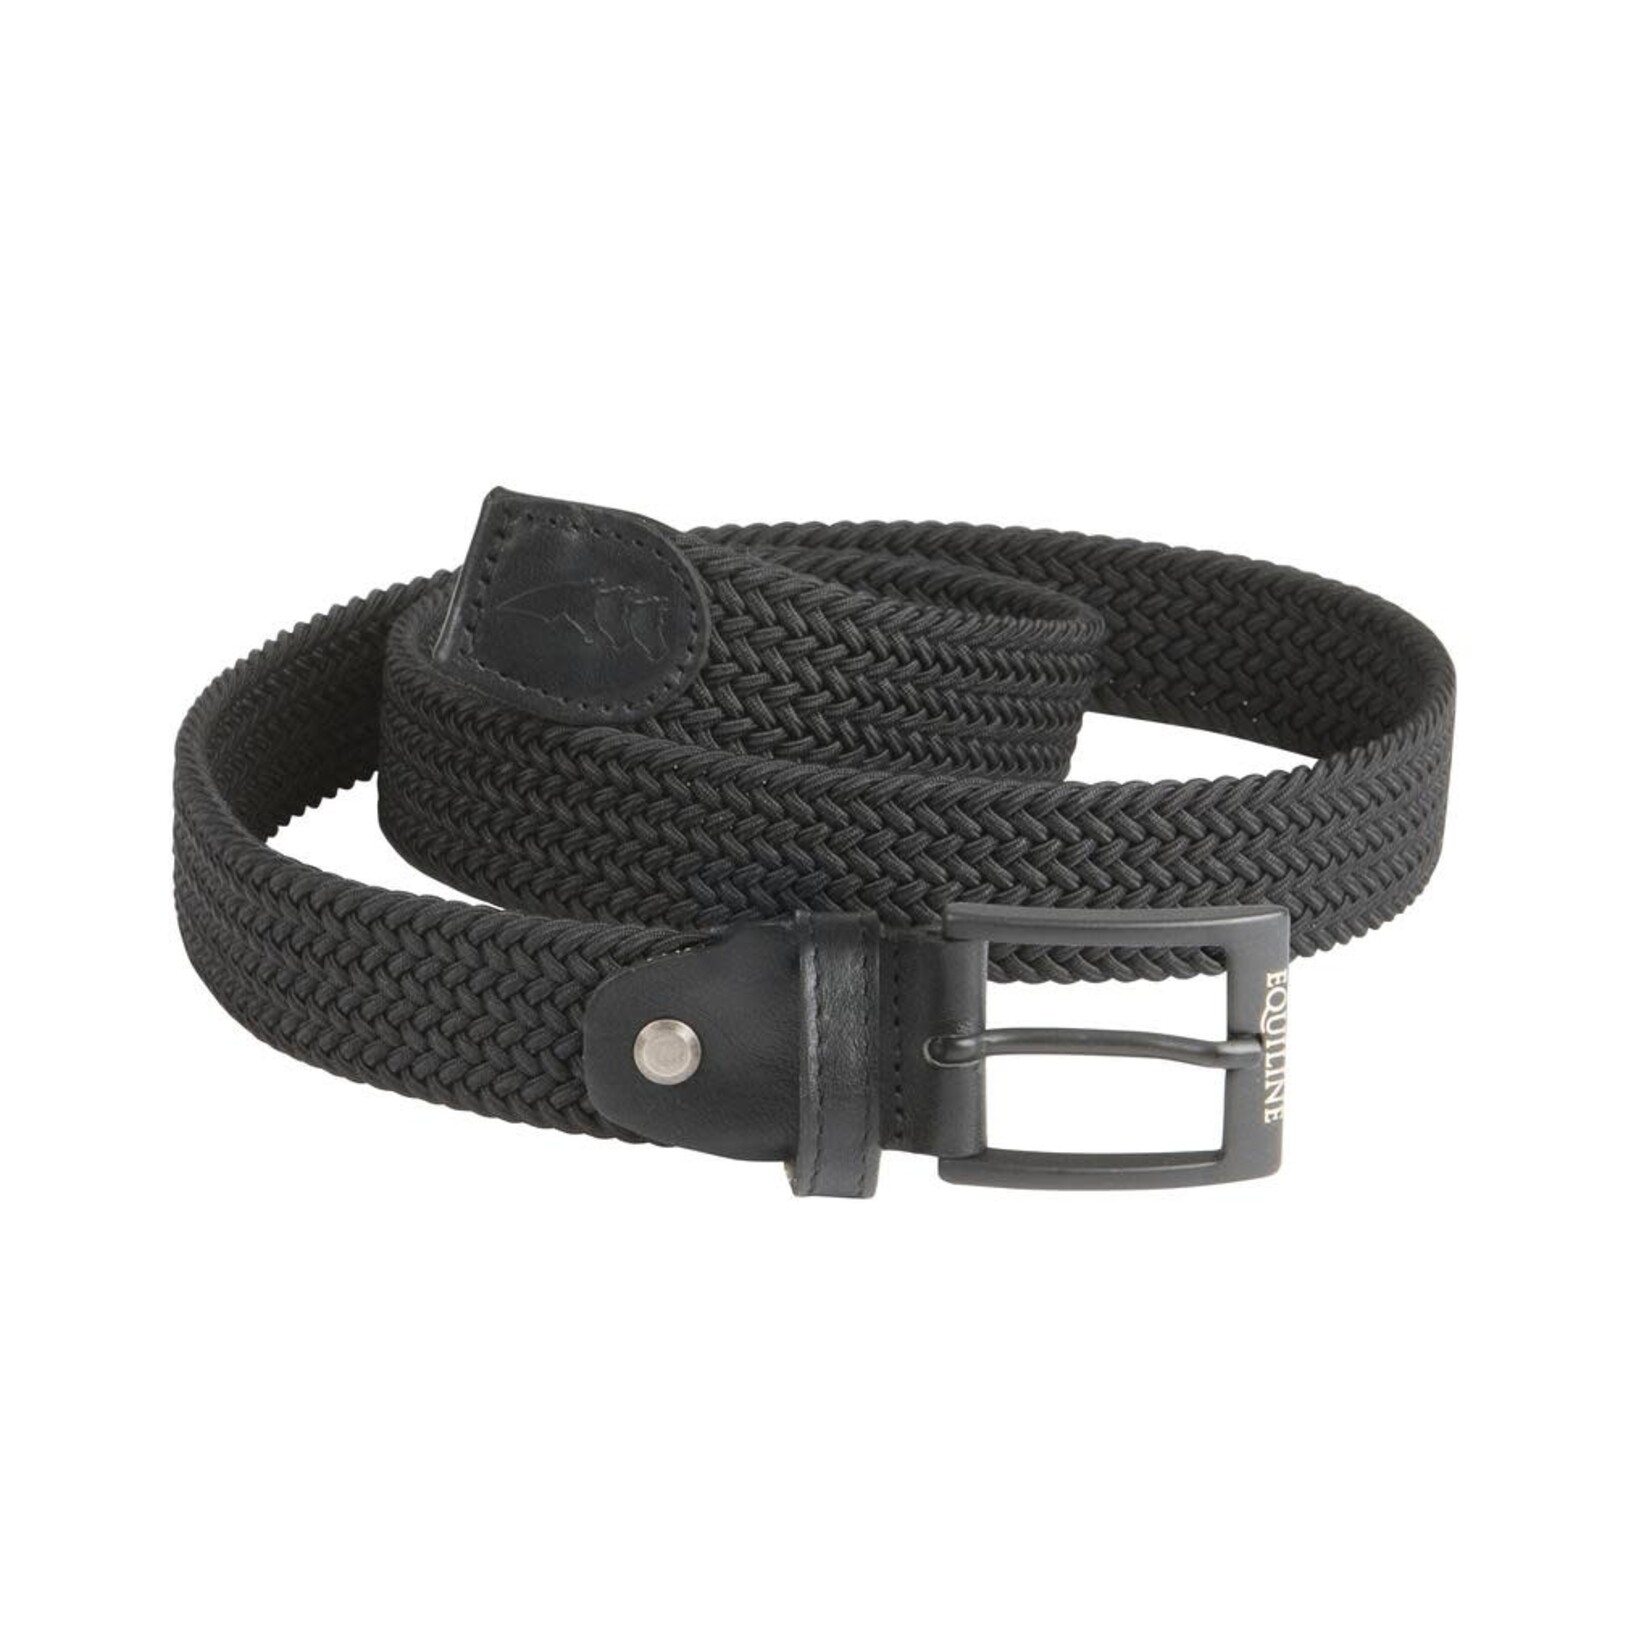 Equiline 214-T11324 Equiline Clayc Braided Belt